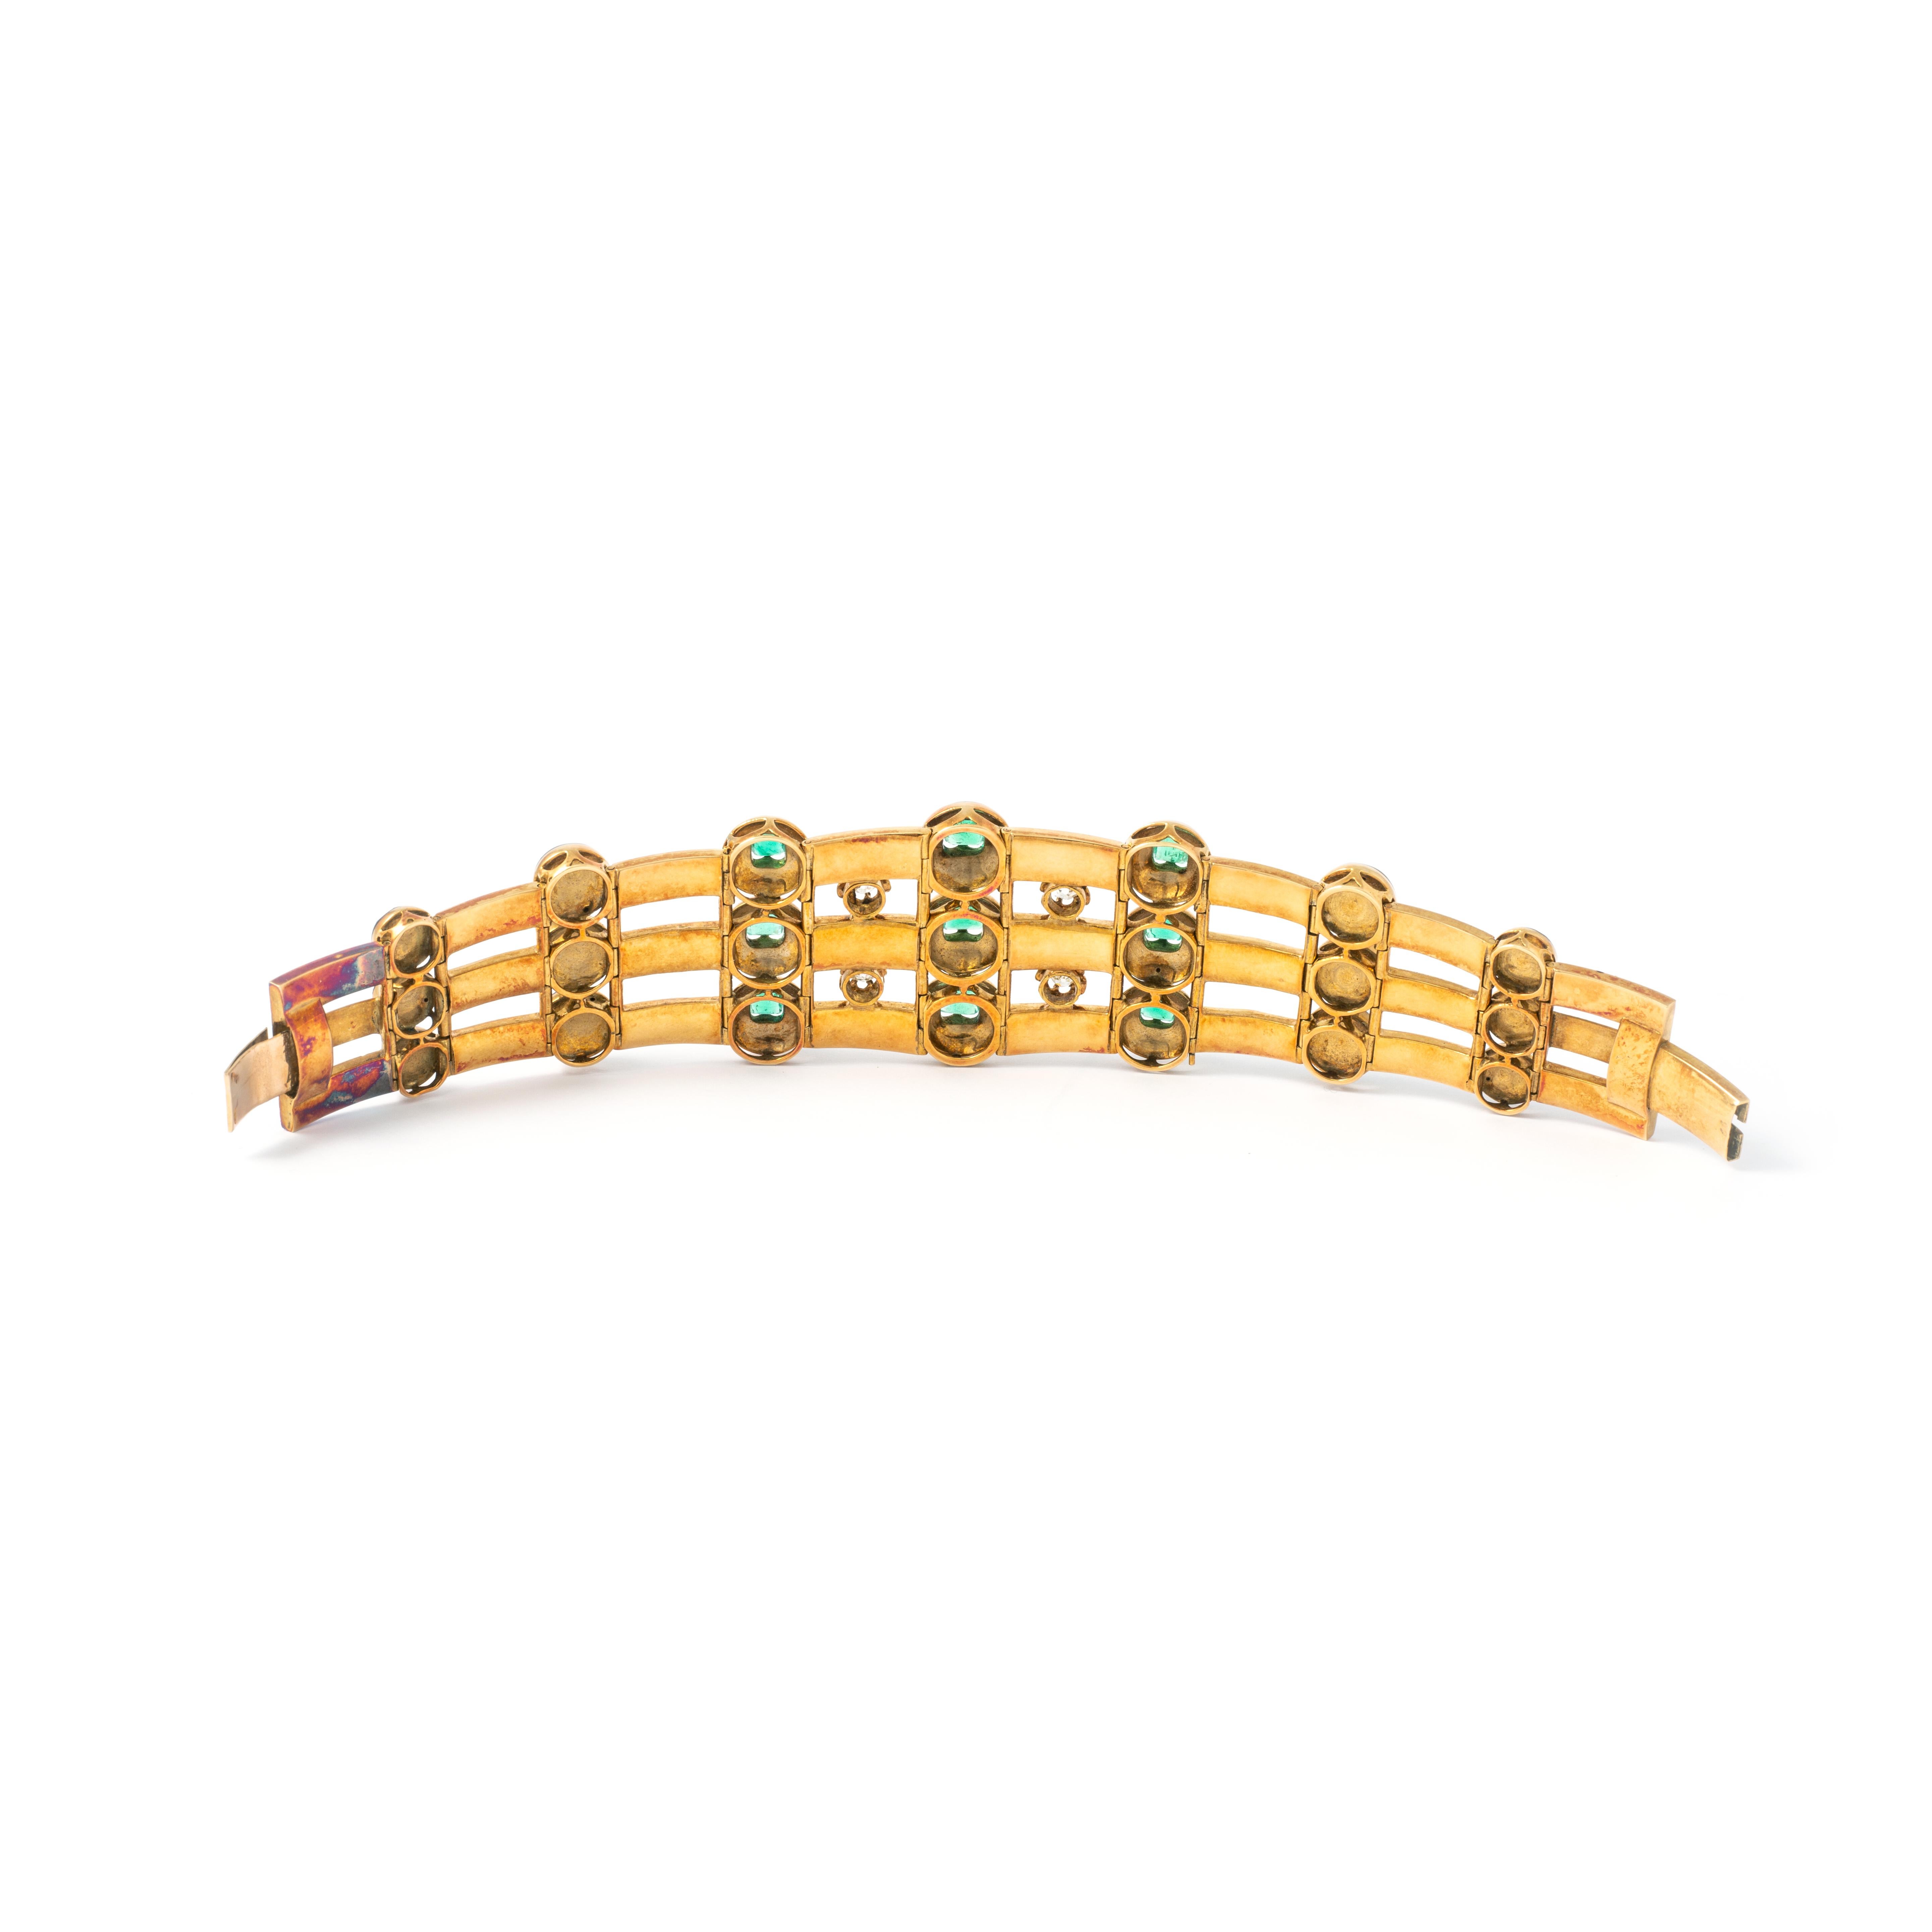 Yellow Gold Black Enameled Bracelet set by Colombian Emerald and Old mine cut Diamond.
Colombian Emeralds: approx. 3.60 carats.
Old mine cut Diamonds: approx. 0.60 carat.
Length: 17.50 cm.
Width at the biggest: 3.50 cm.
French maker's mark: